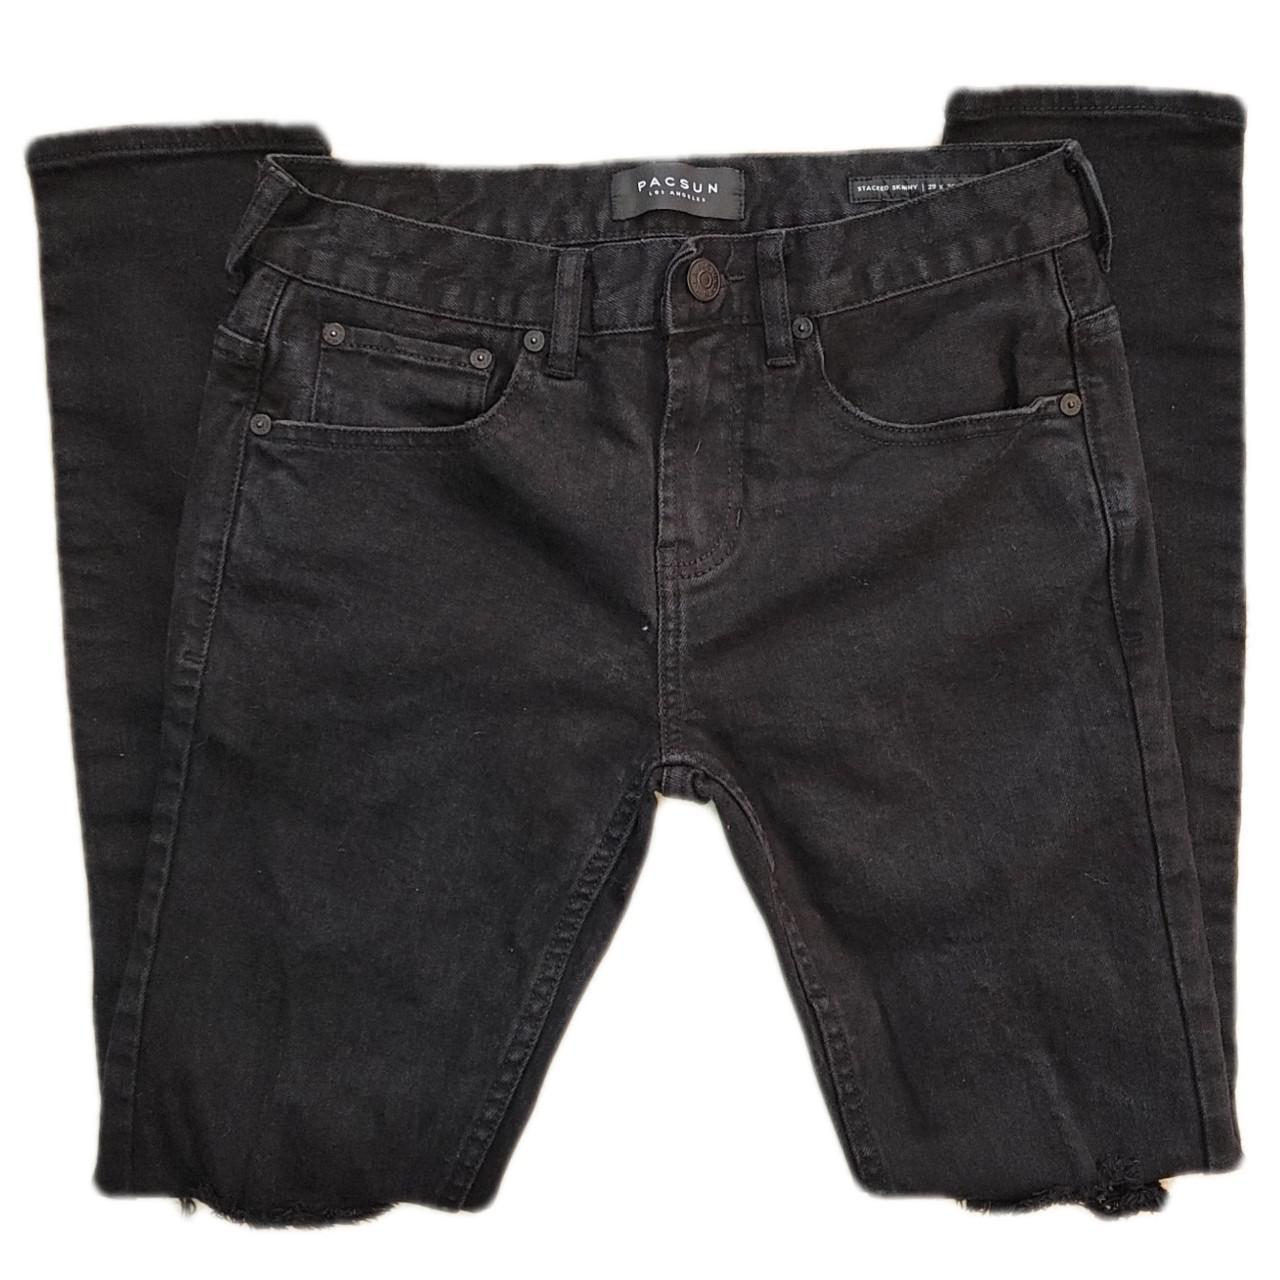 Product Image 1 - Pacsun Skinny Jeans Size 29"